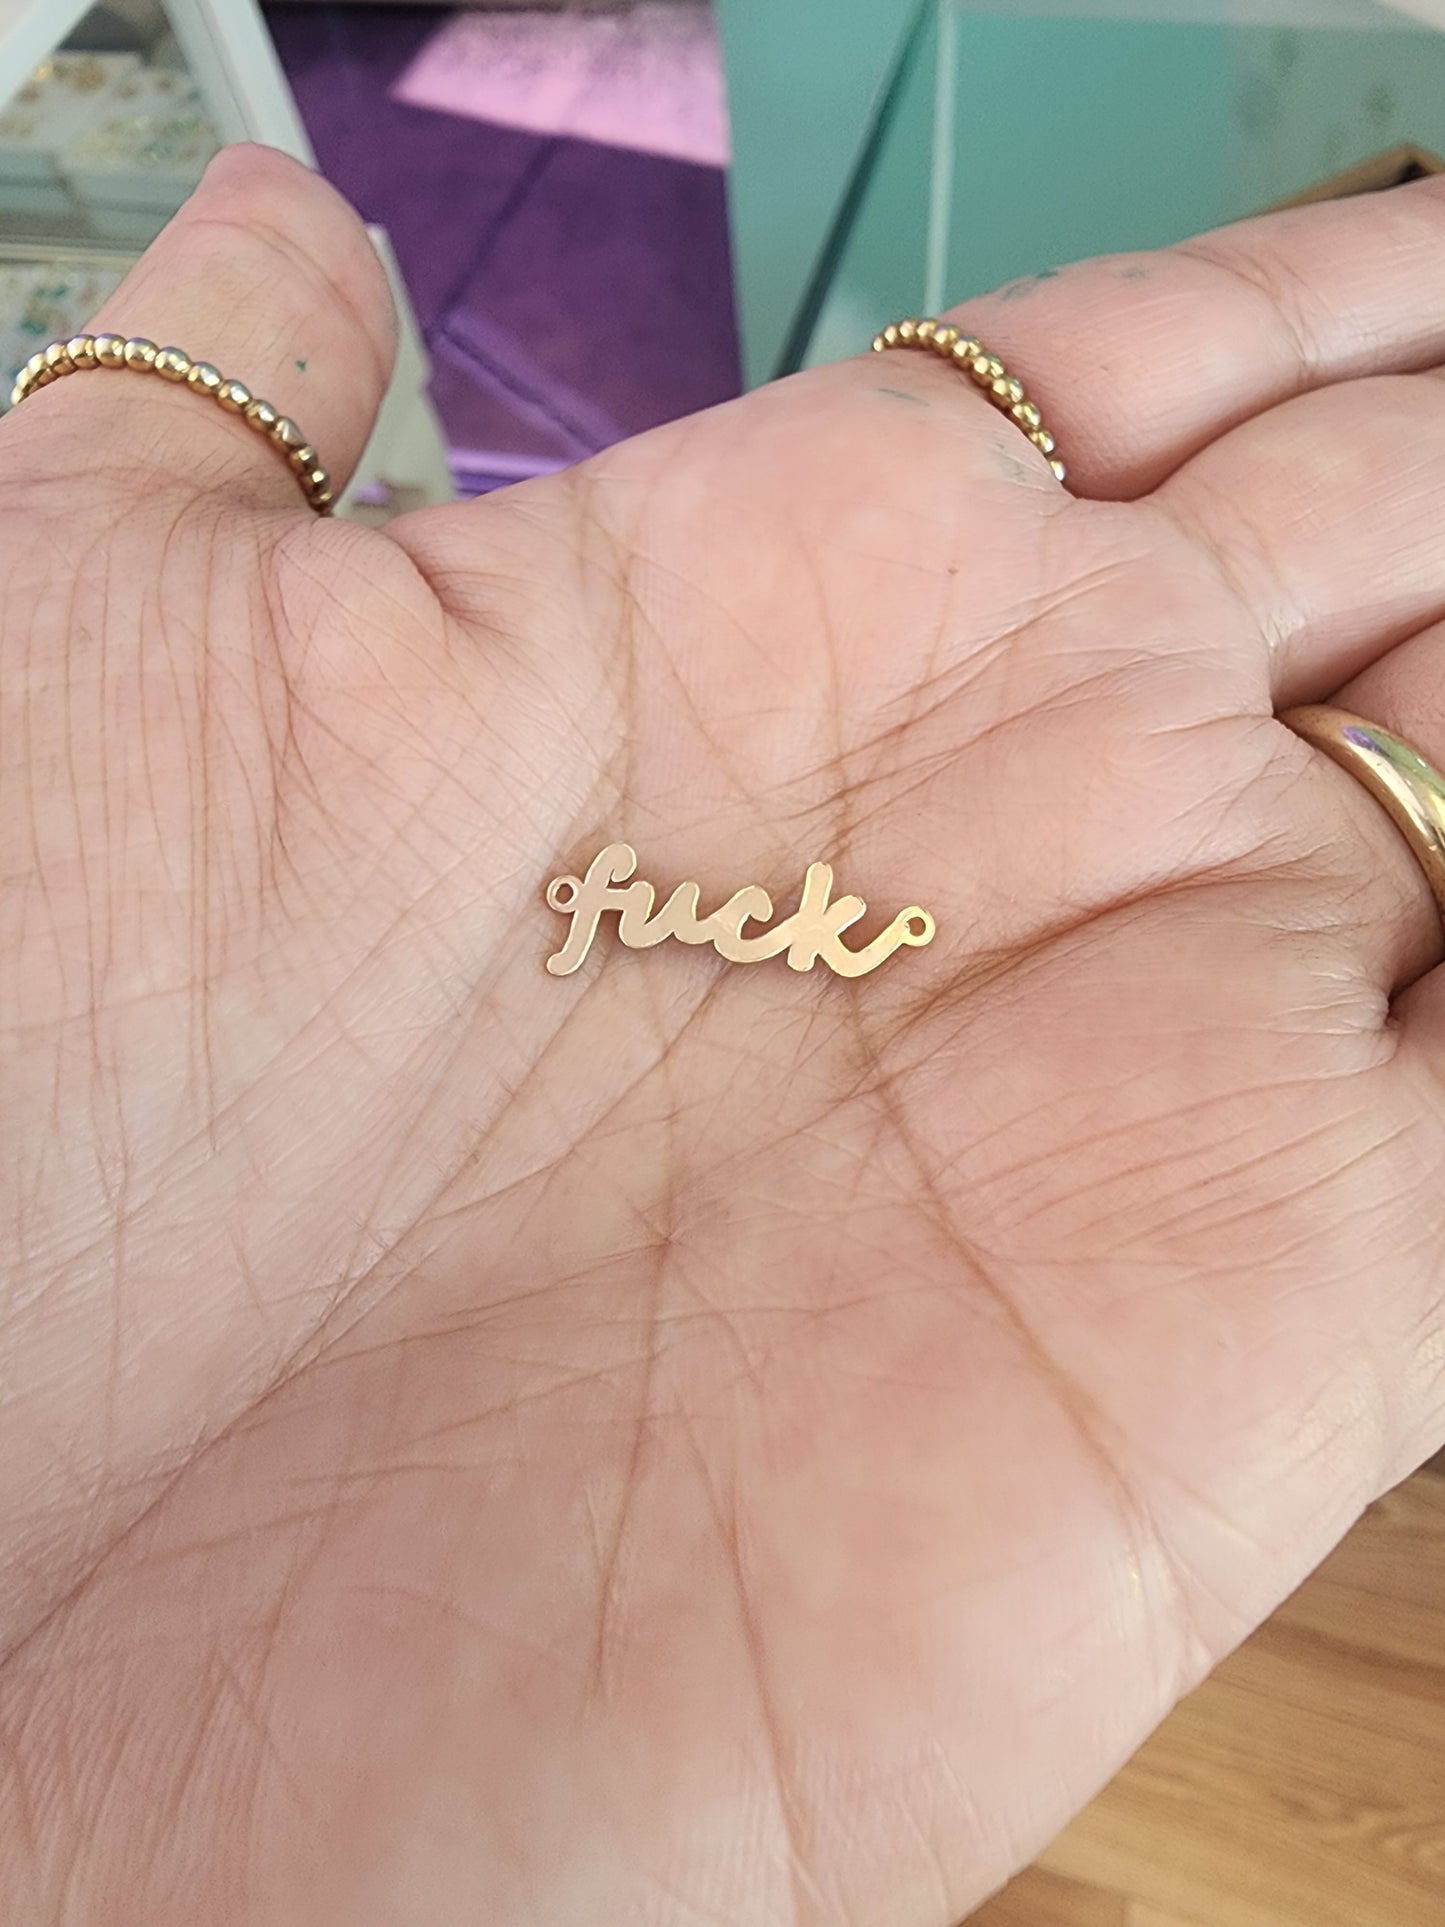 Gold Filled Fuck Connector - Sterling Silver or 14k Gold Supplies for Permanent Jewelry Word Charm